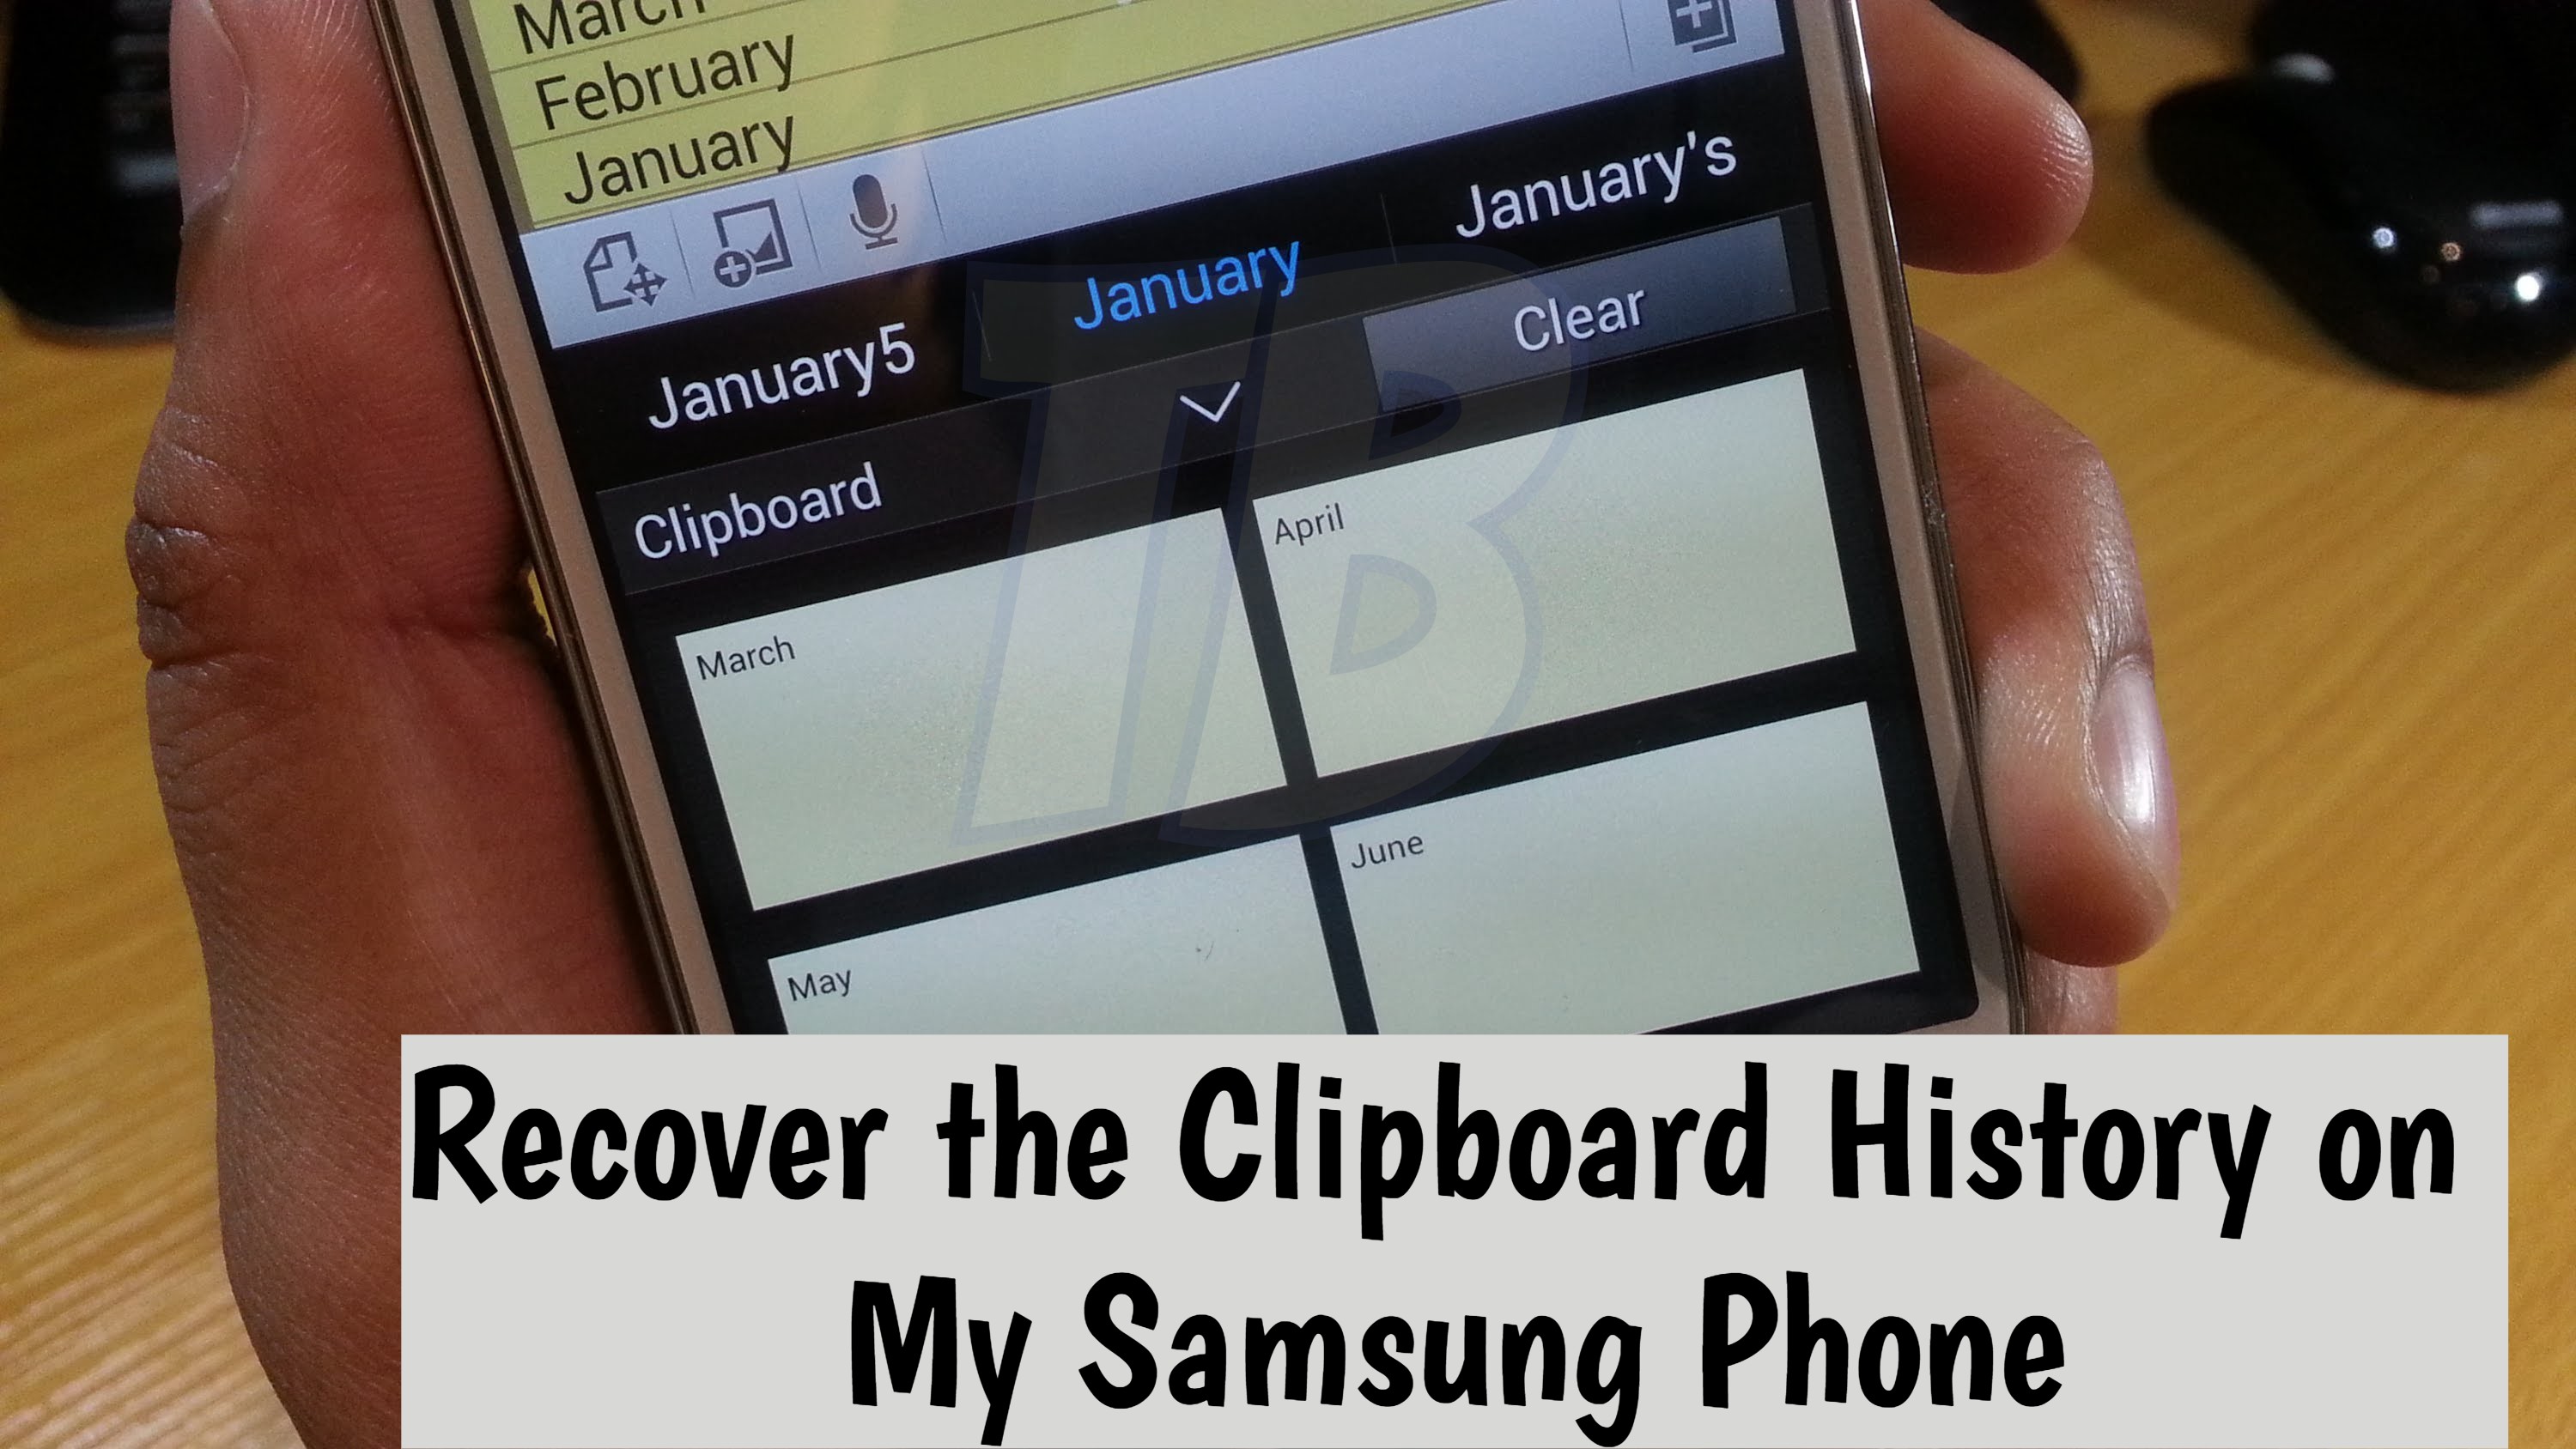 Recover the Clipboard History on My Samsung Phone